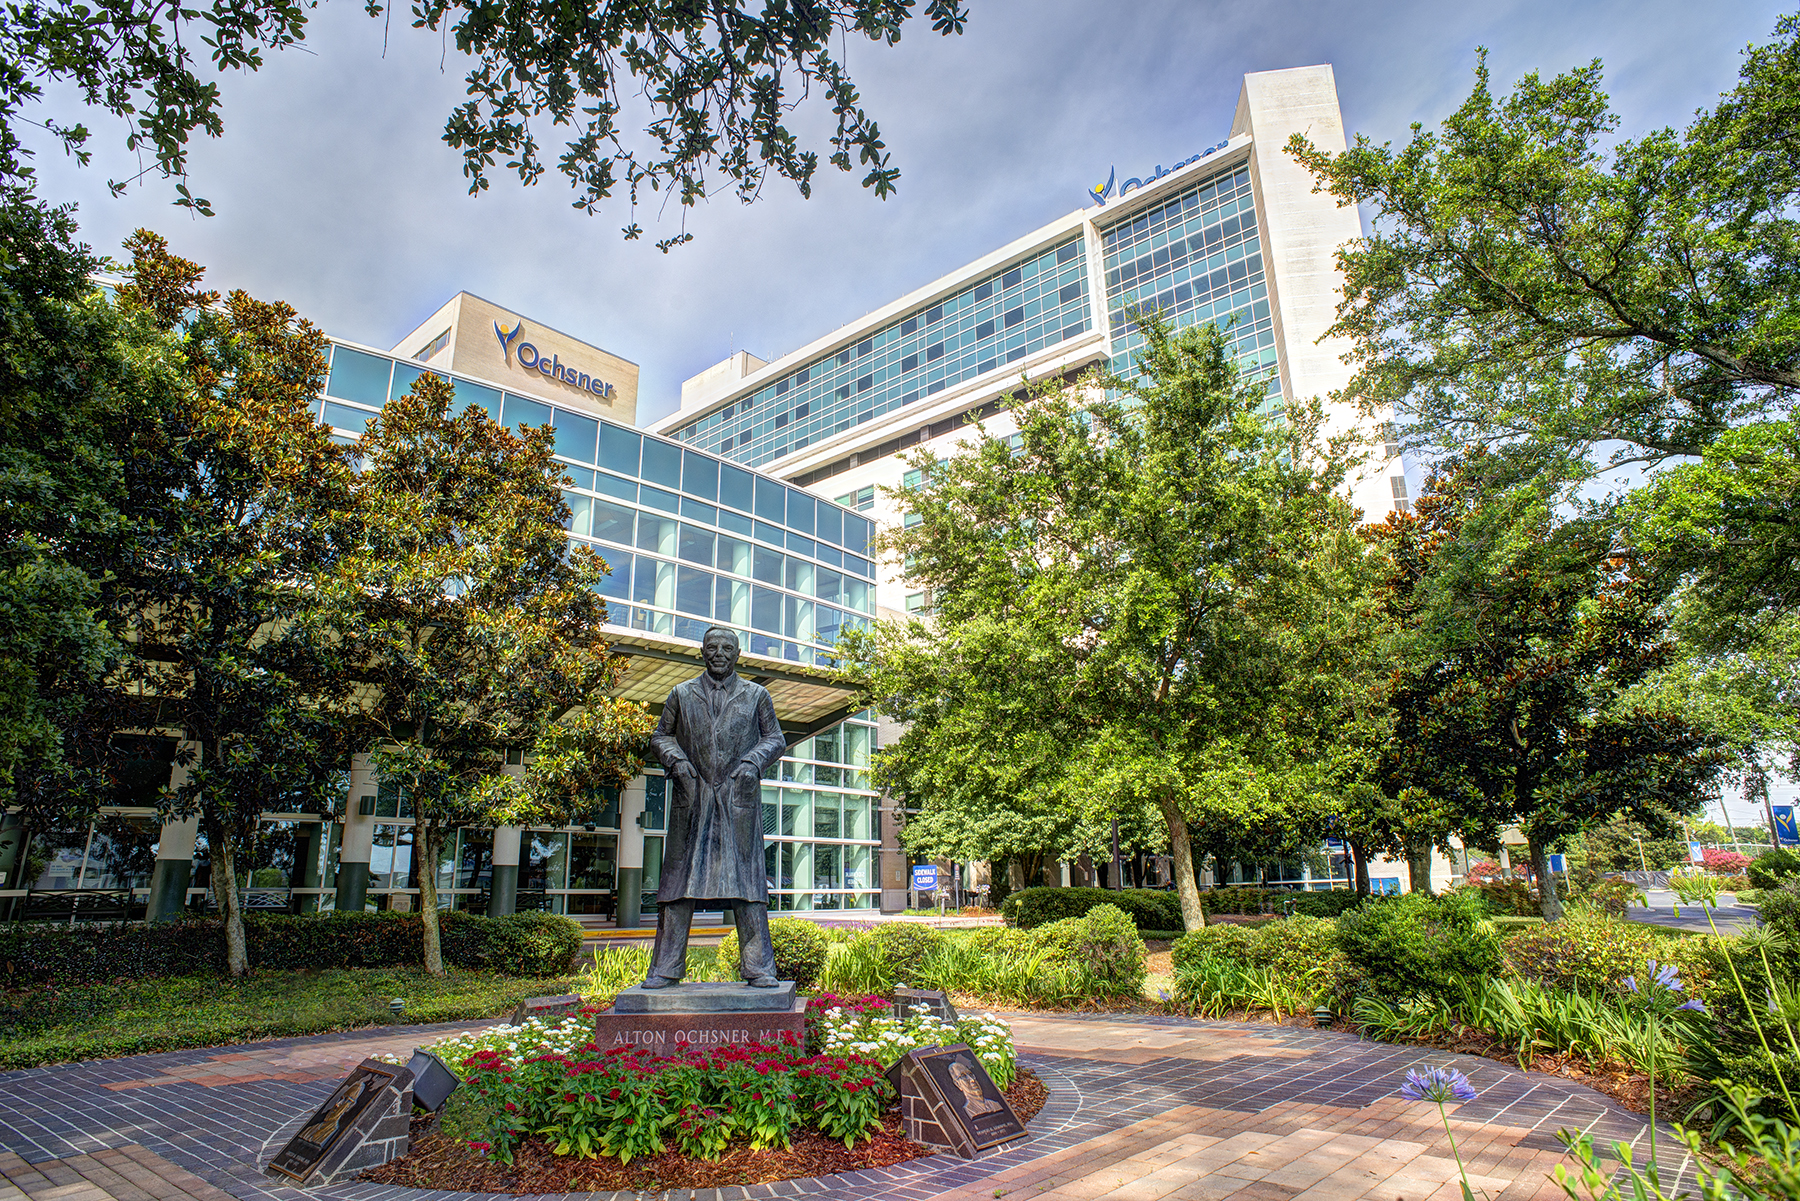 Ochsner Medical Center (OMC), inclusive of Ochsner Medical Center- West Bank Campus and Ochsner Baptist*, has been ranked the #1 hospital in Louisiana for the 10th consecutive year and recognized as a Best Hospital for 2021-22 by U.S. News & World Report, the global authority on hospital rankings and consumer advice. Ochsner was also ranked #1 in the New Orleans metro area.

OMC is the largest facility in Ochsner Health’s system of 40 hospitals and more than 200 clinics and urgent care centers across Louisiana, Mississippi, and west Alabama. OMC continues to expand services across its three campuses in Greater New Orleans, providing expert, patient-centered care in both clinic and in-patient settings, using the latest treatments and technology.